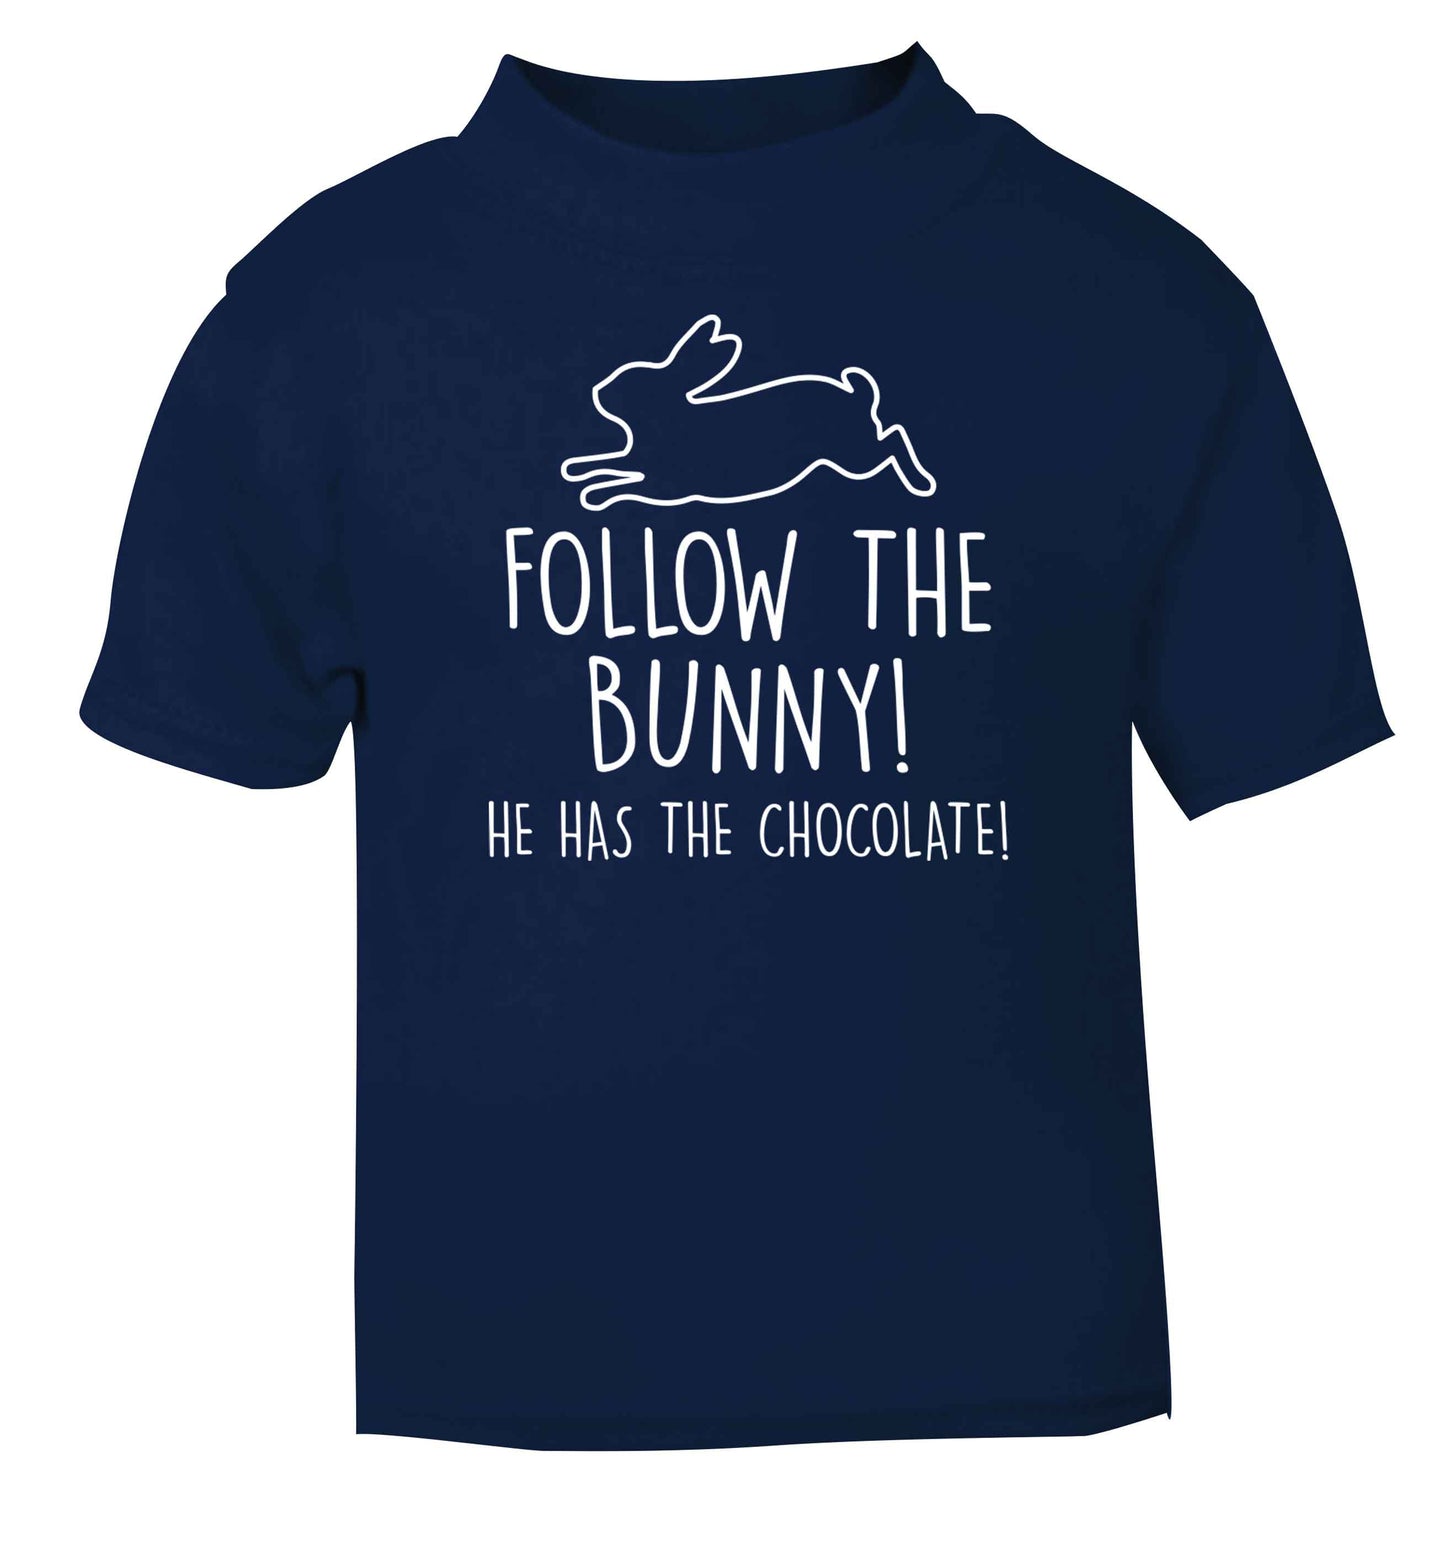 Follow the bunny! He has the chocolate navy baby toddler Tshirt 2 Years